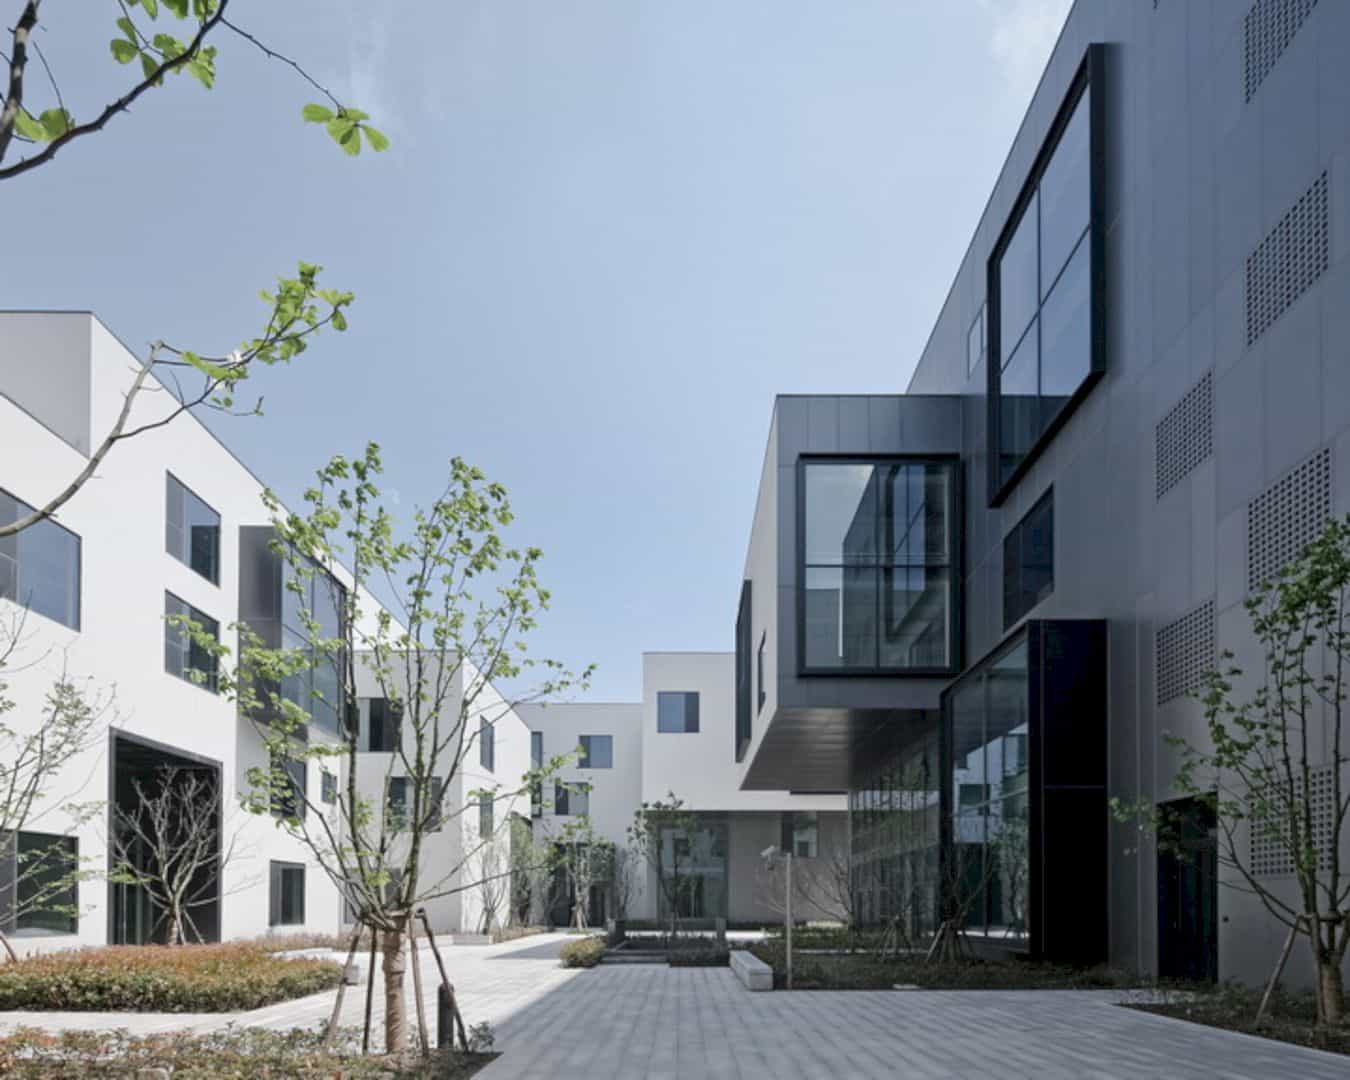 Zhangjiang Ic Harbour Phase Iii An Office Park That Formulates A Network Of Public Space 2